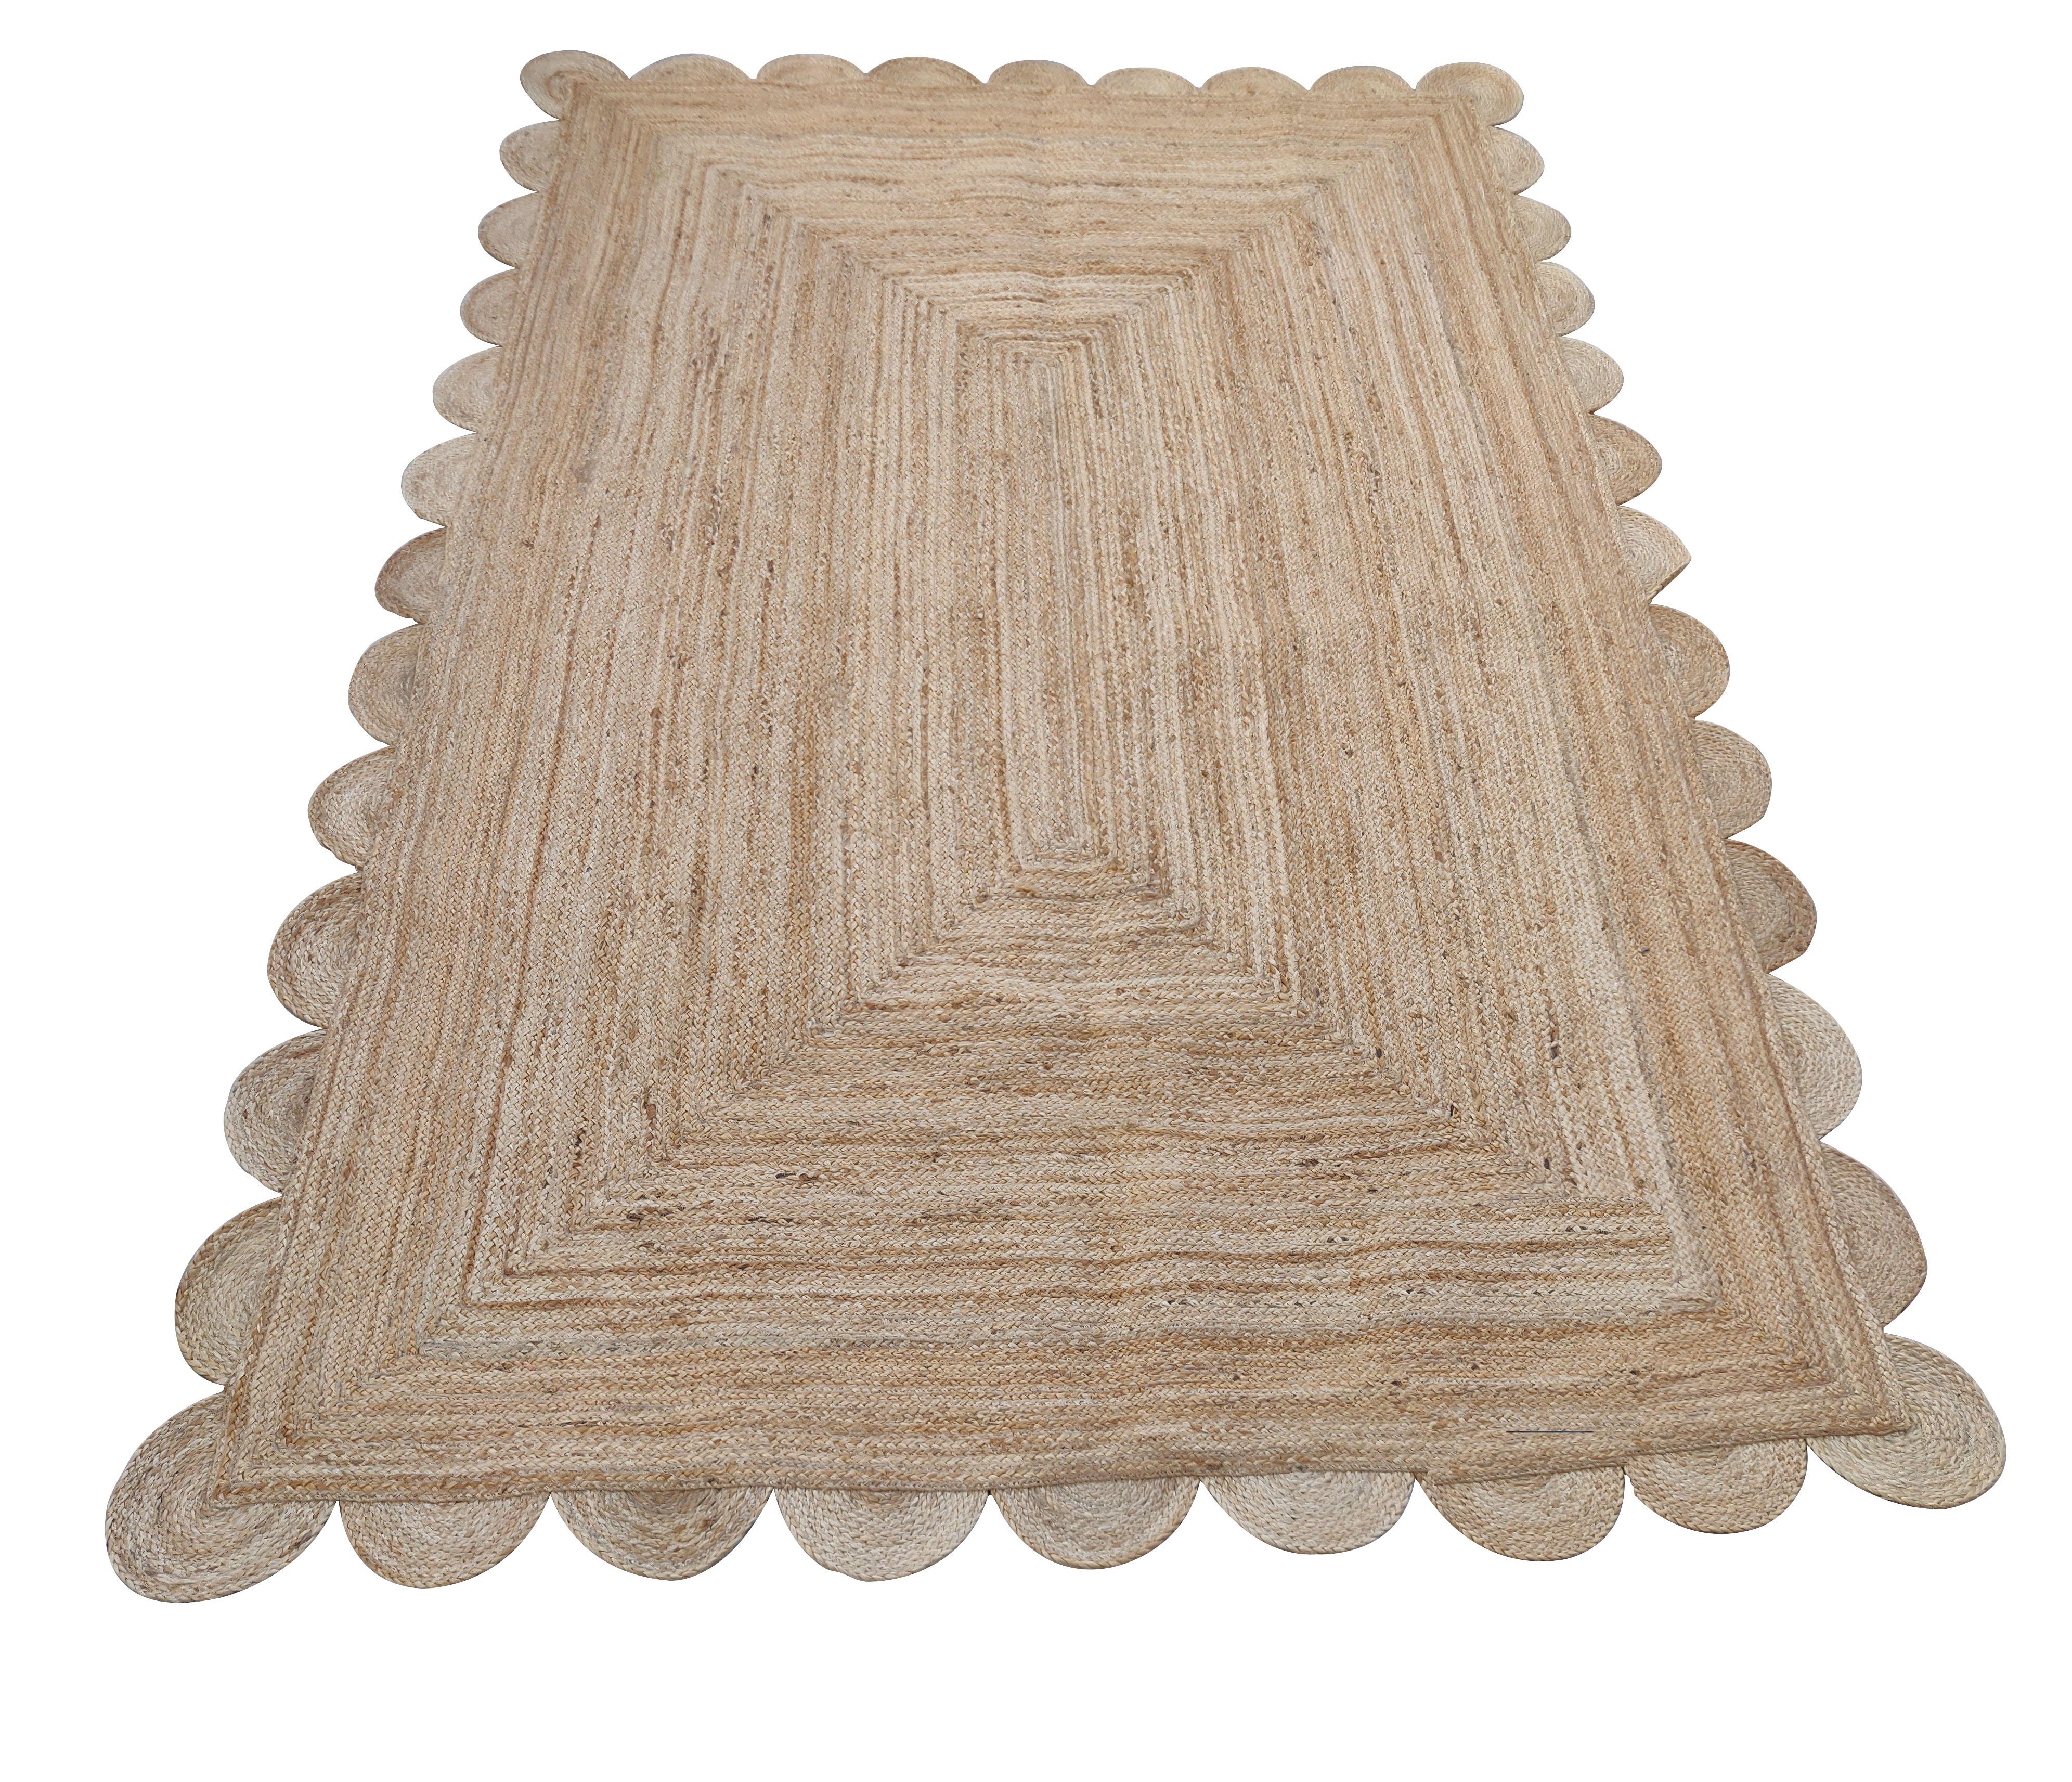 Hand-Woven Handmade Jute Area Flat Weave Rug, 6x9 Solid Jute Scalloped Indian Dhurrie Rug For Sale